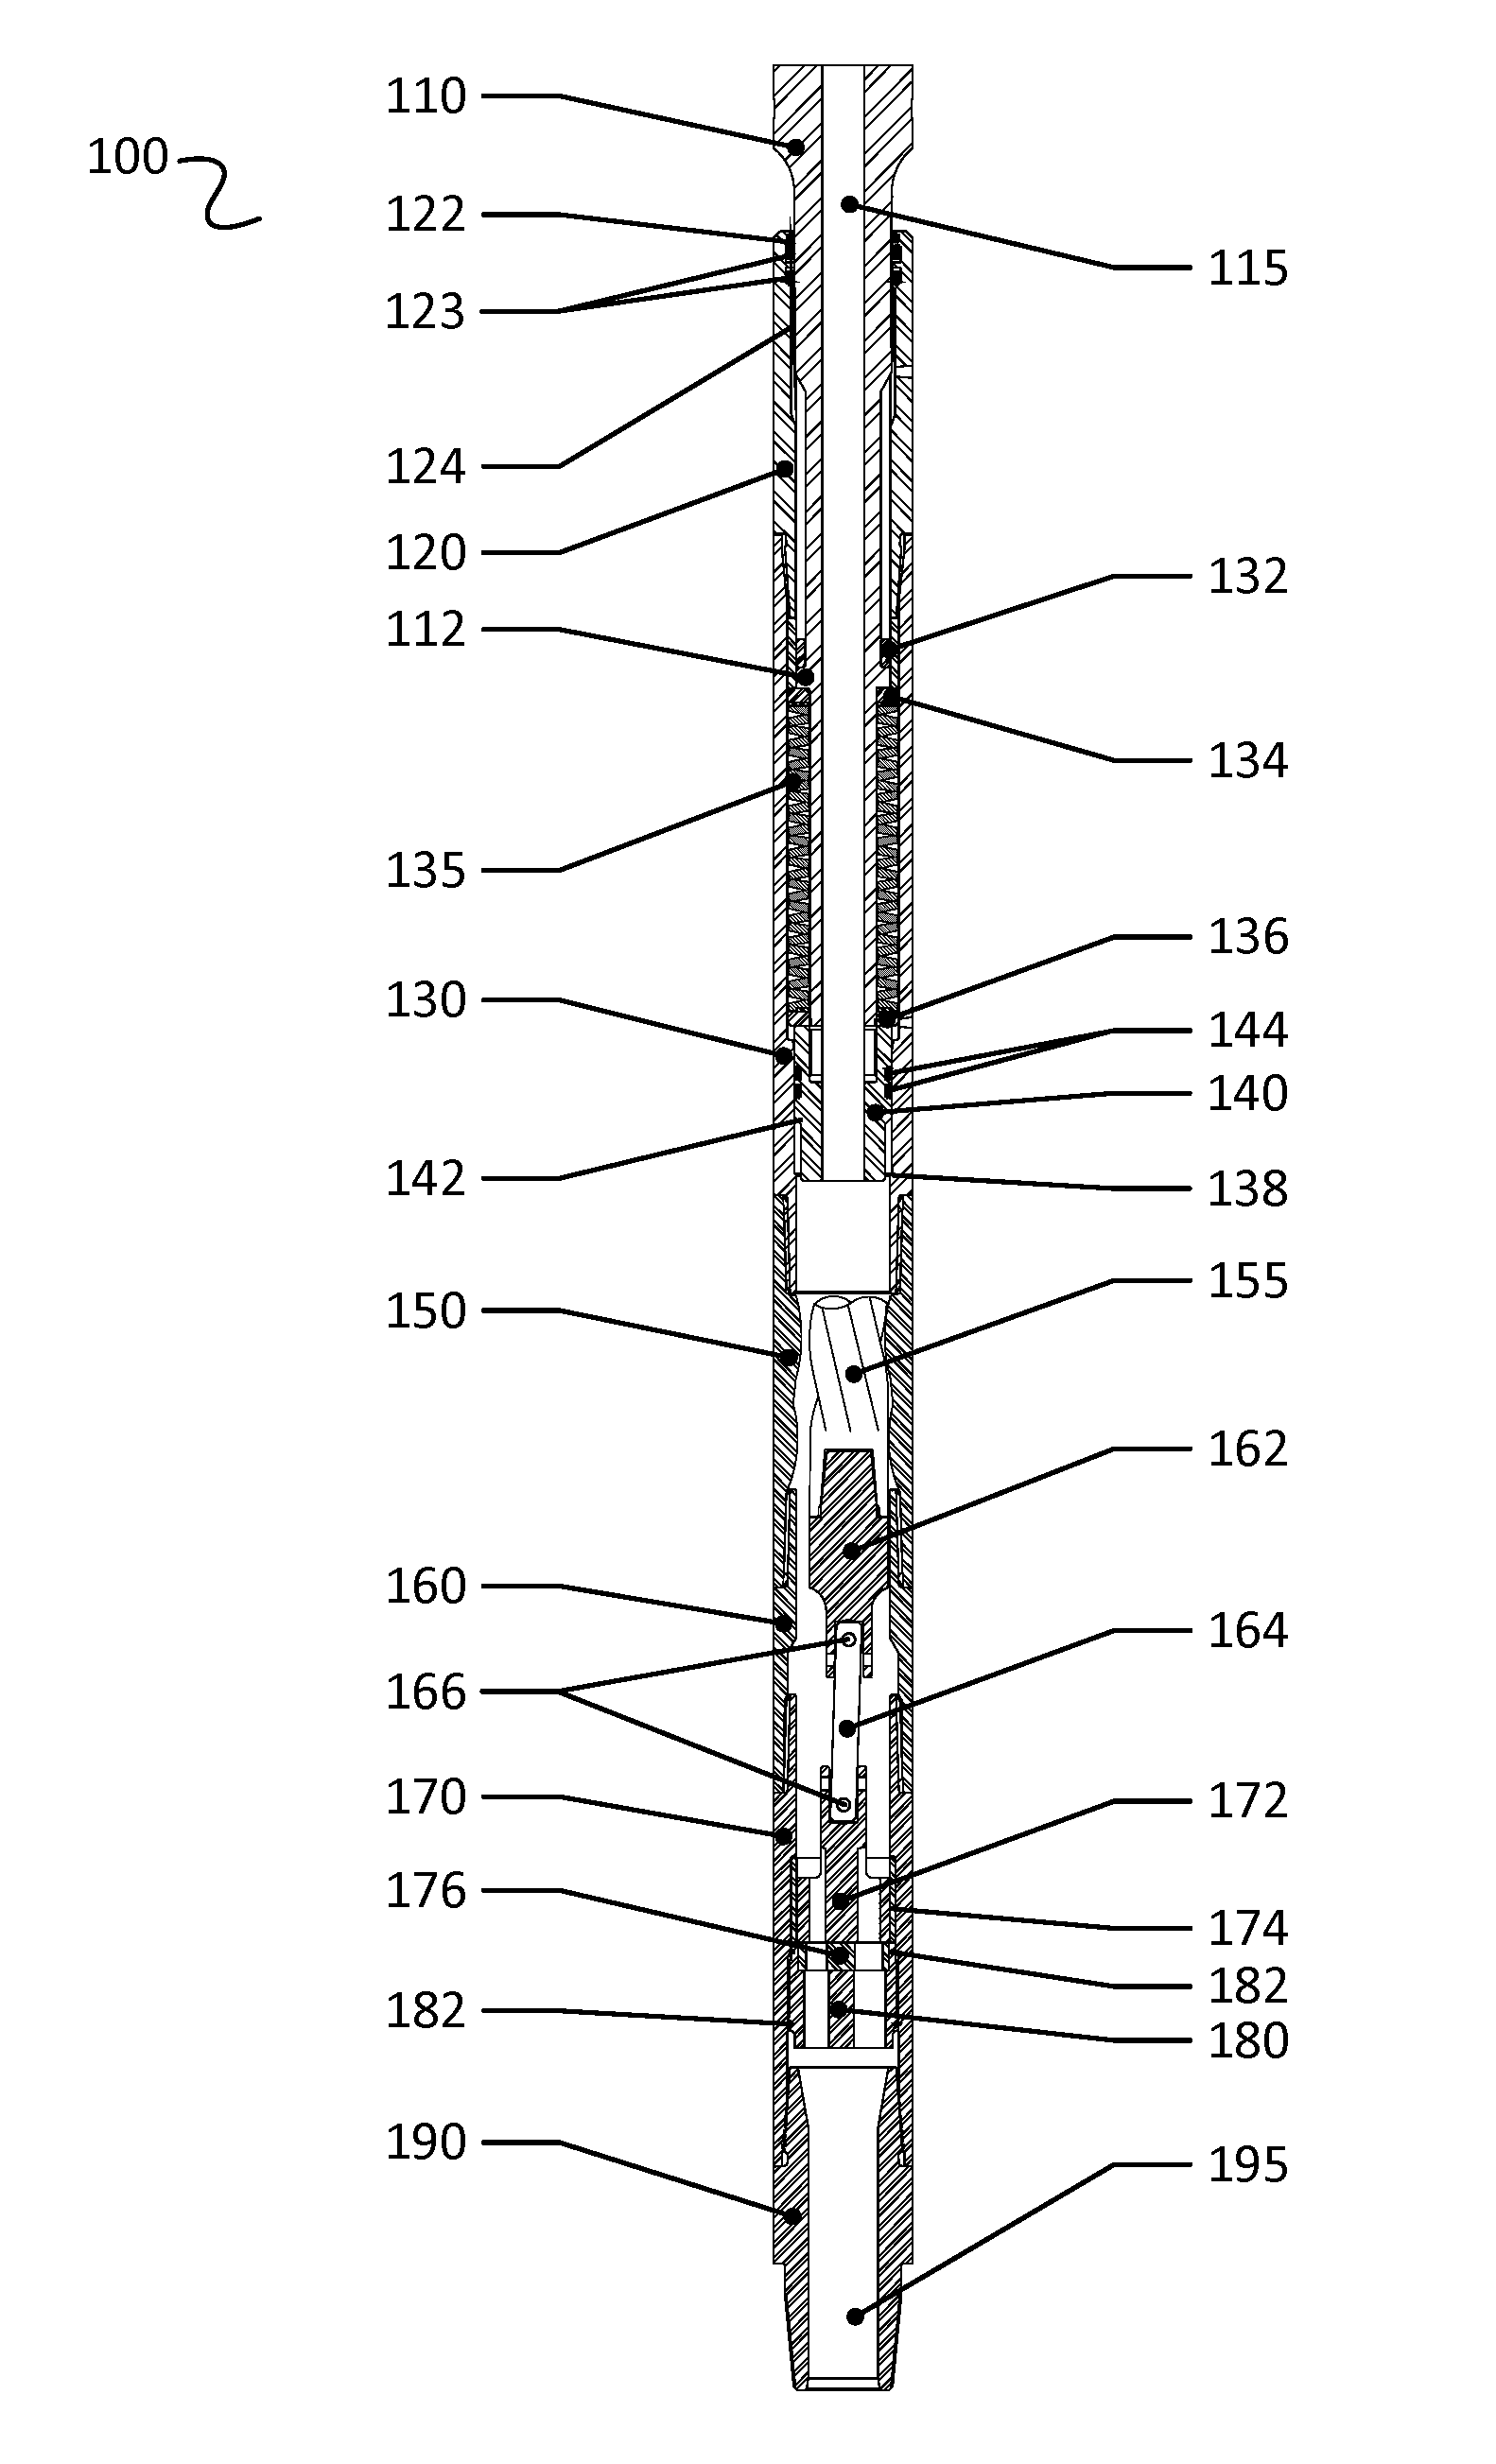 Flow controlling downhole tool